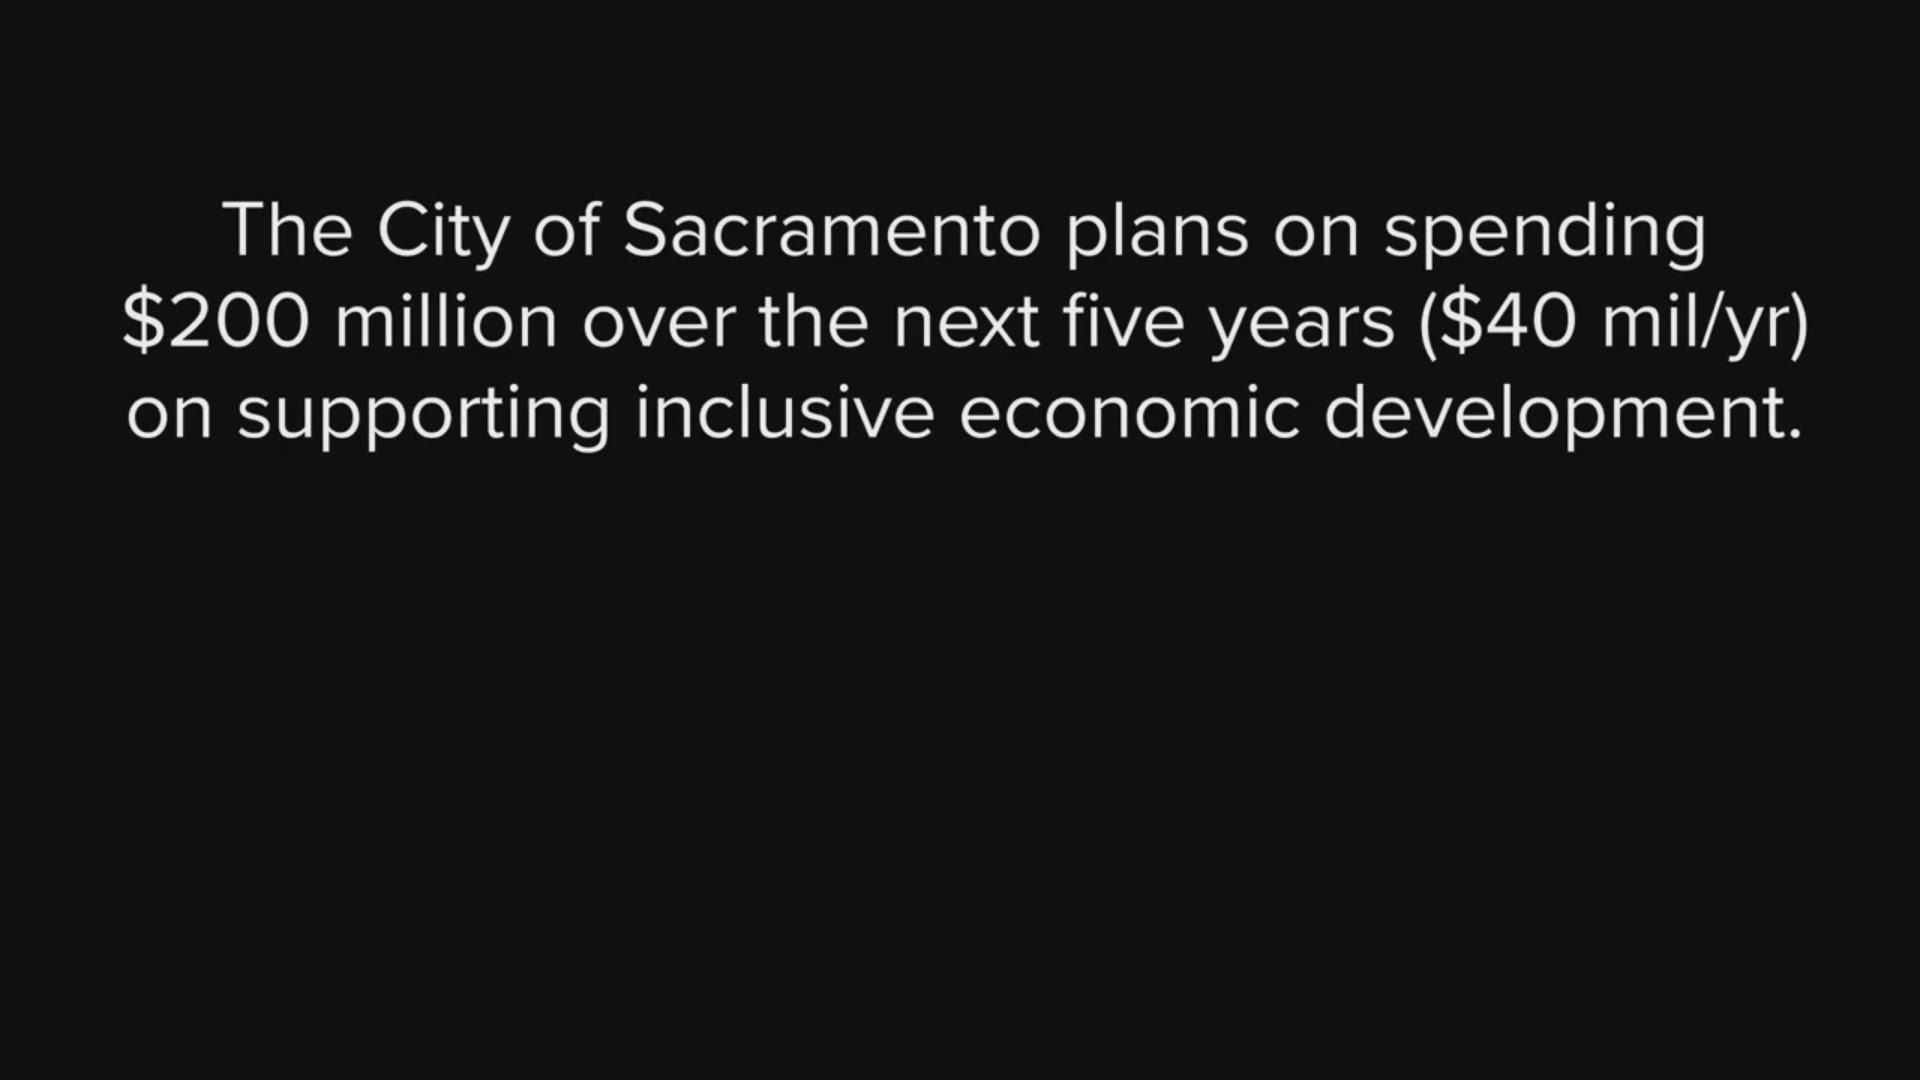 Sacramento City Council passed a plan committing $40 million per year for five years to inclusive economic development. City Councilman Jay Schenirer talks about why he thinks this is going to benefit the entire community in the long run.